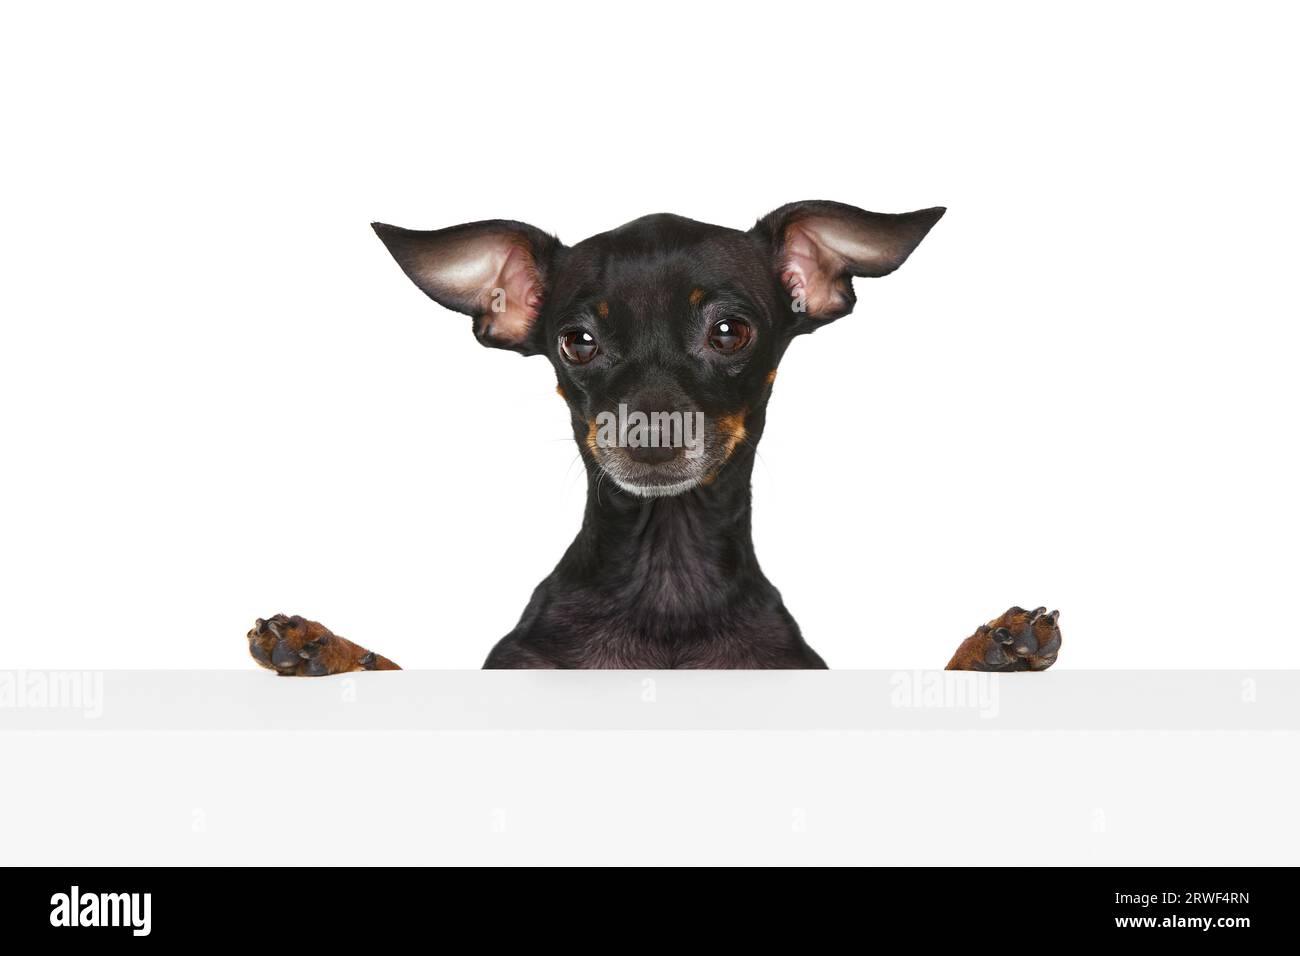 Curiosity. Portrait with one curious dog Prague ratter looking with clever face isolated over white background. Obedient dog Stock Photo